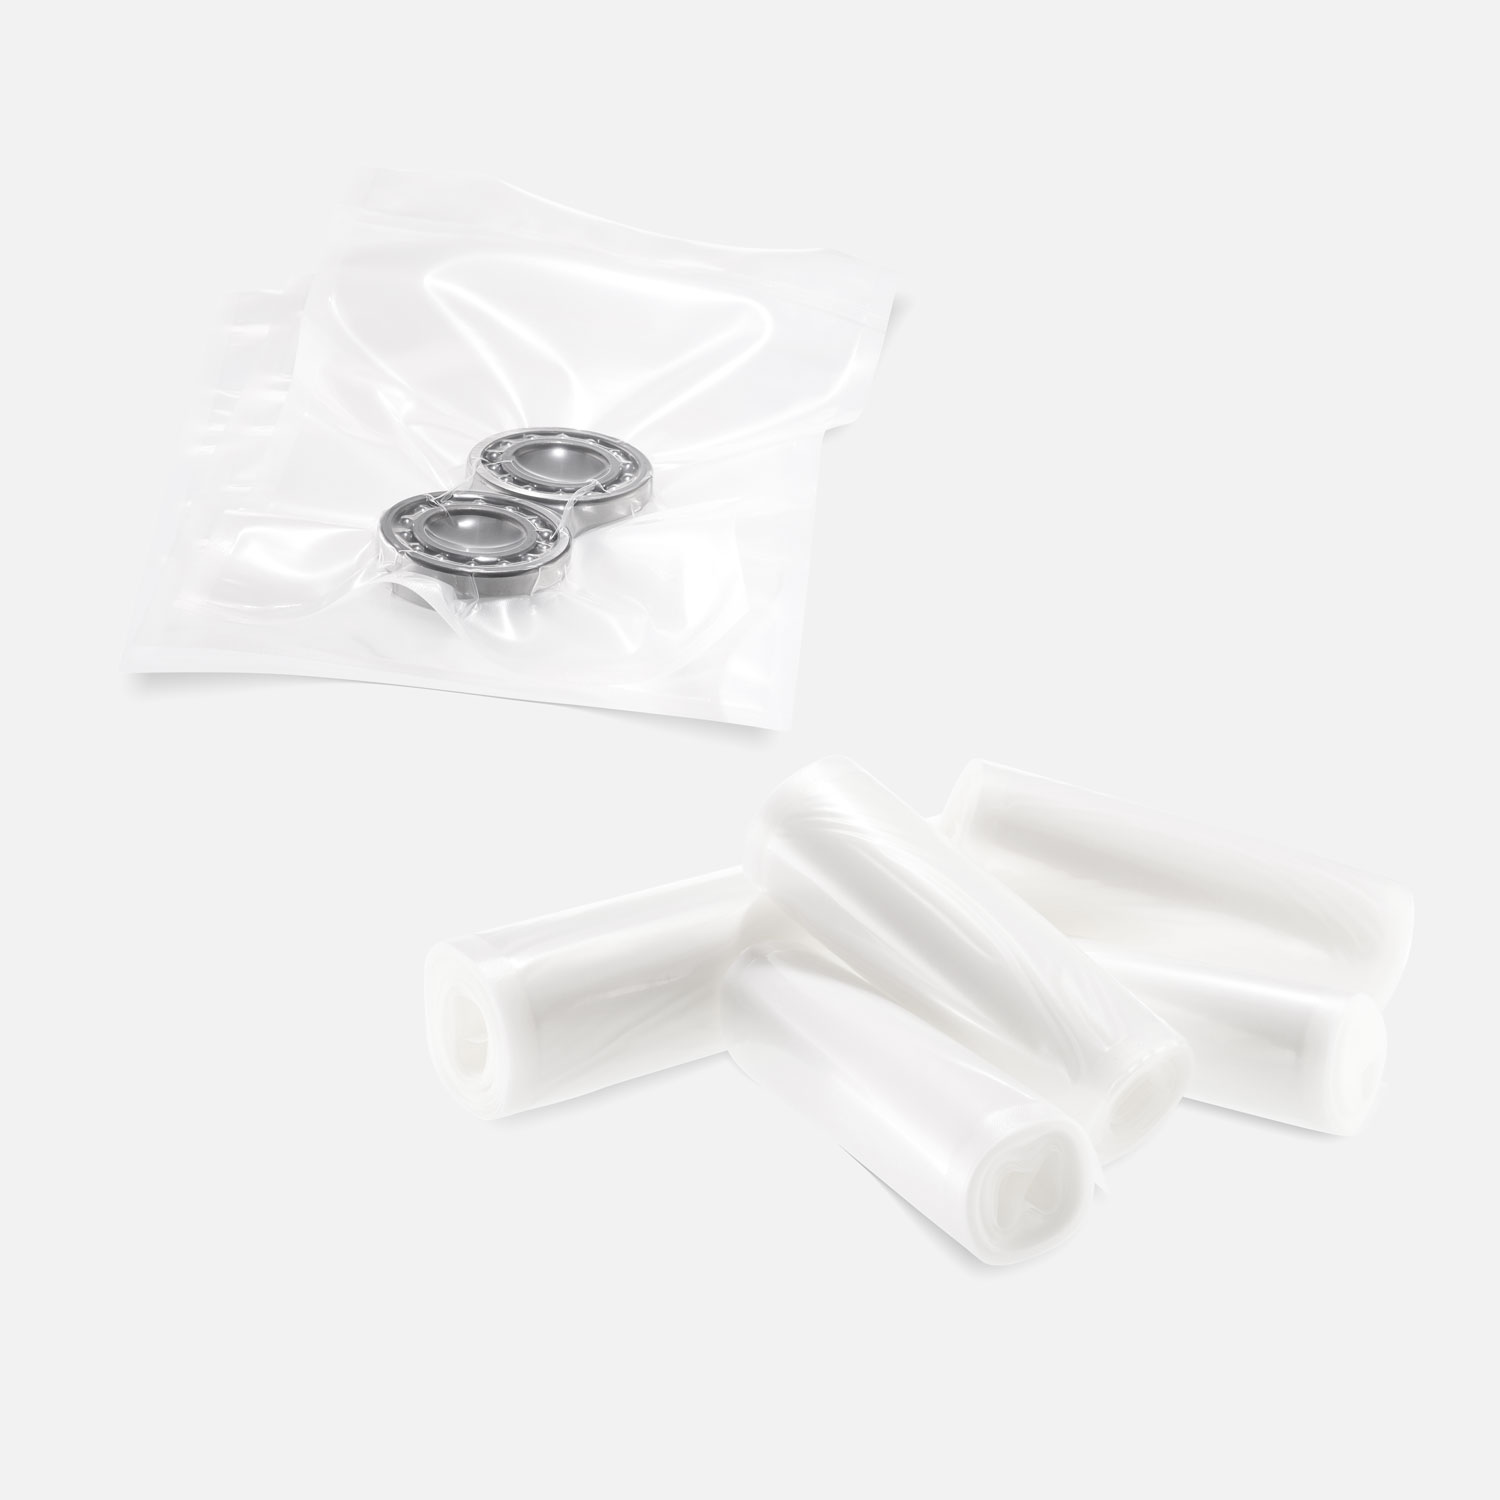 Transparent structured vacuum roll vacuum-sealed with ball bearings